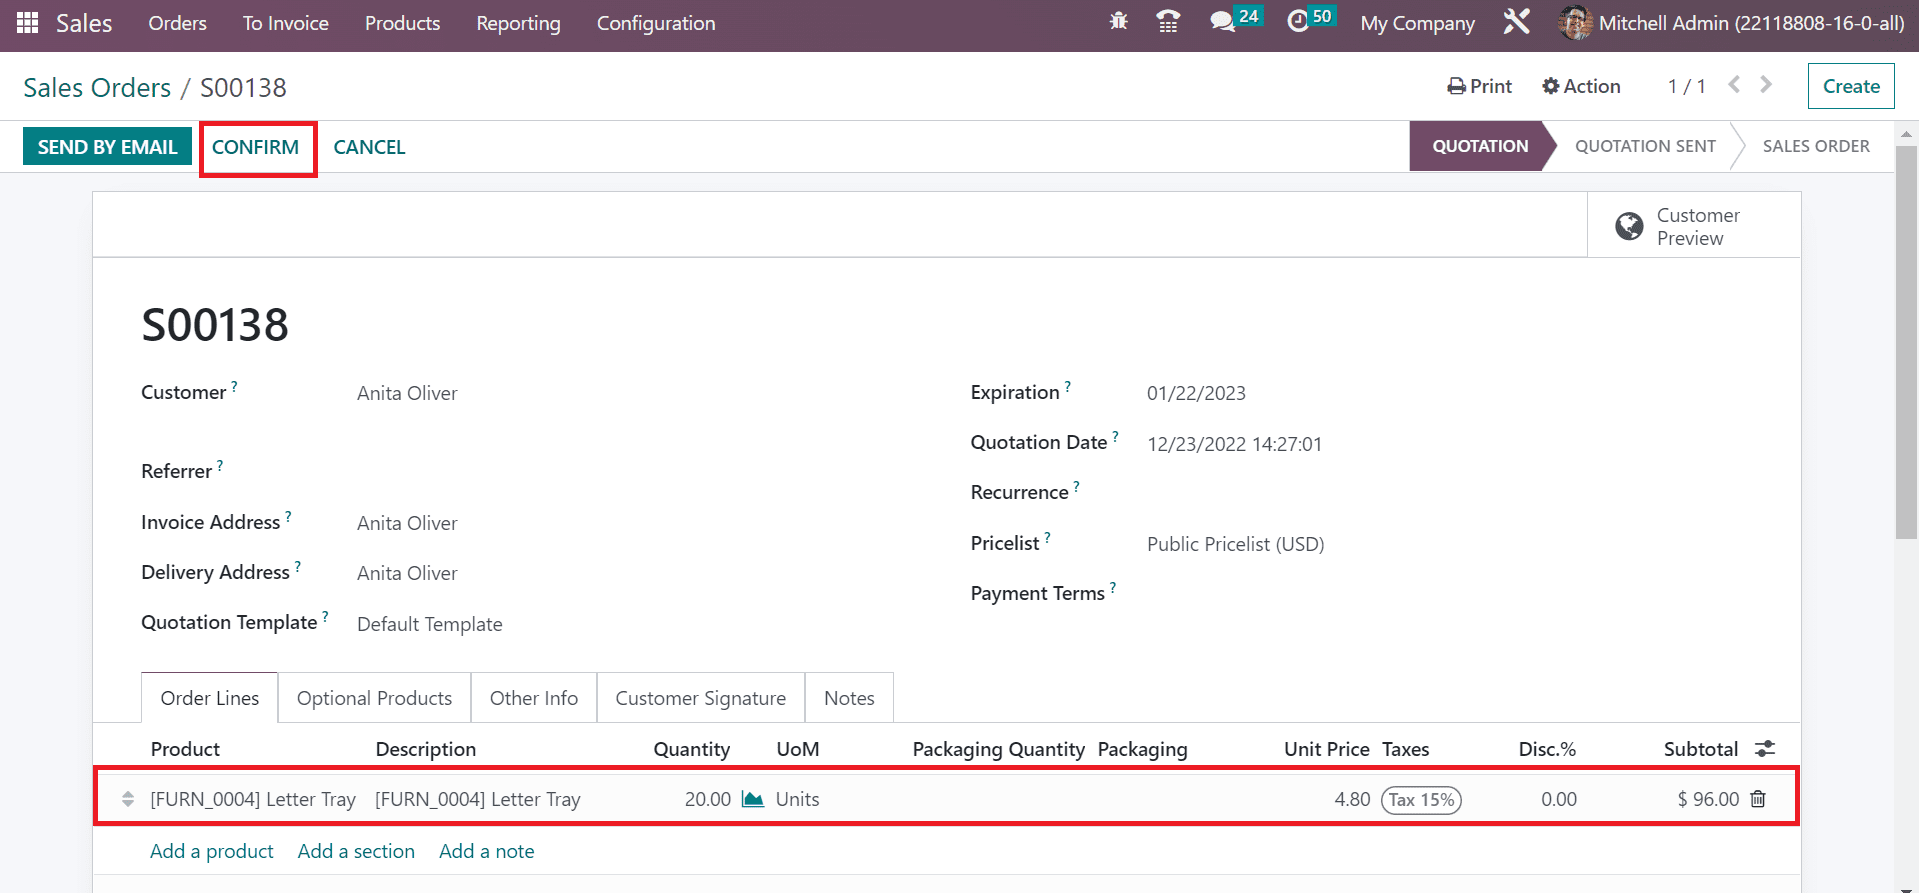 How to Manage Sales Return for an Order Using Odoo 16 Sales App